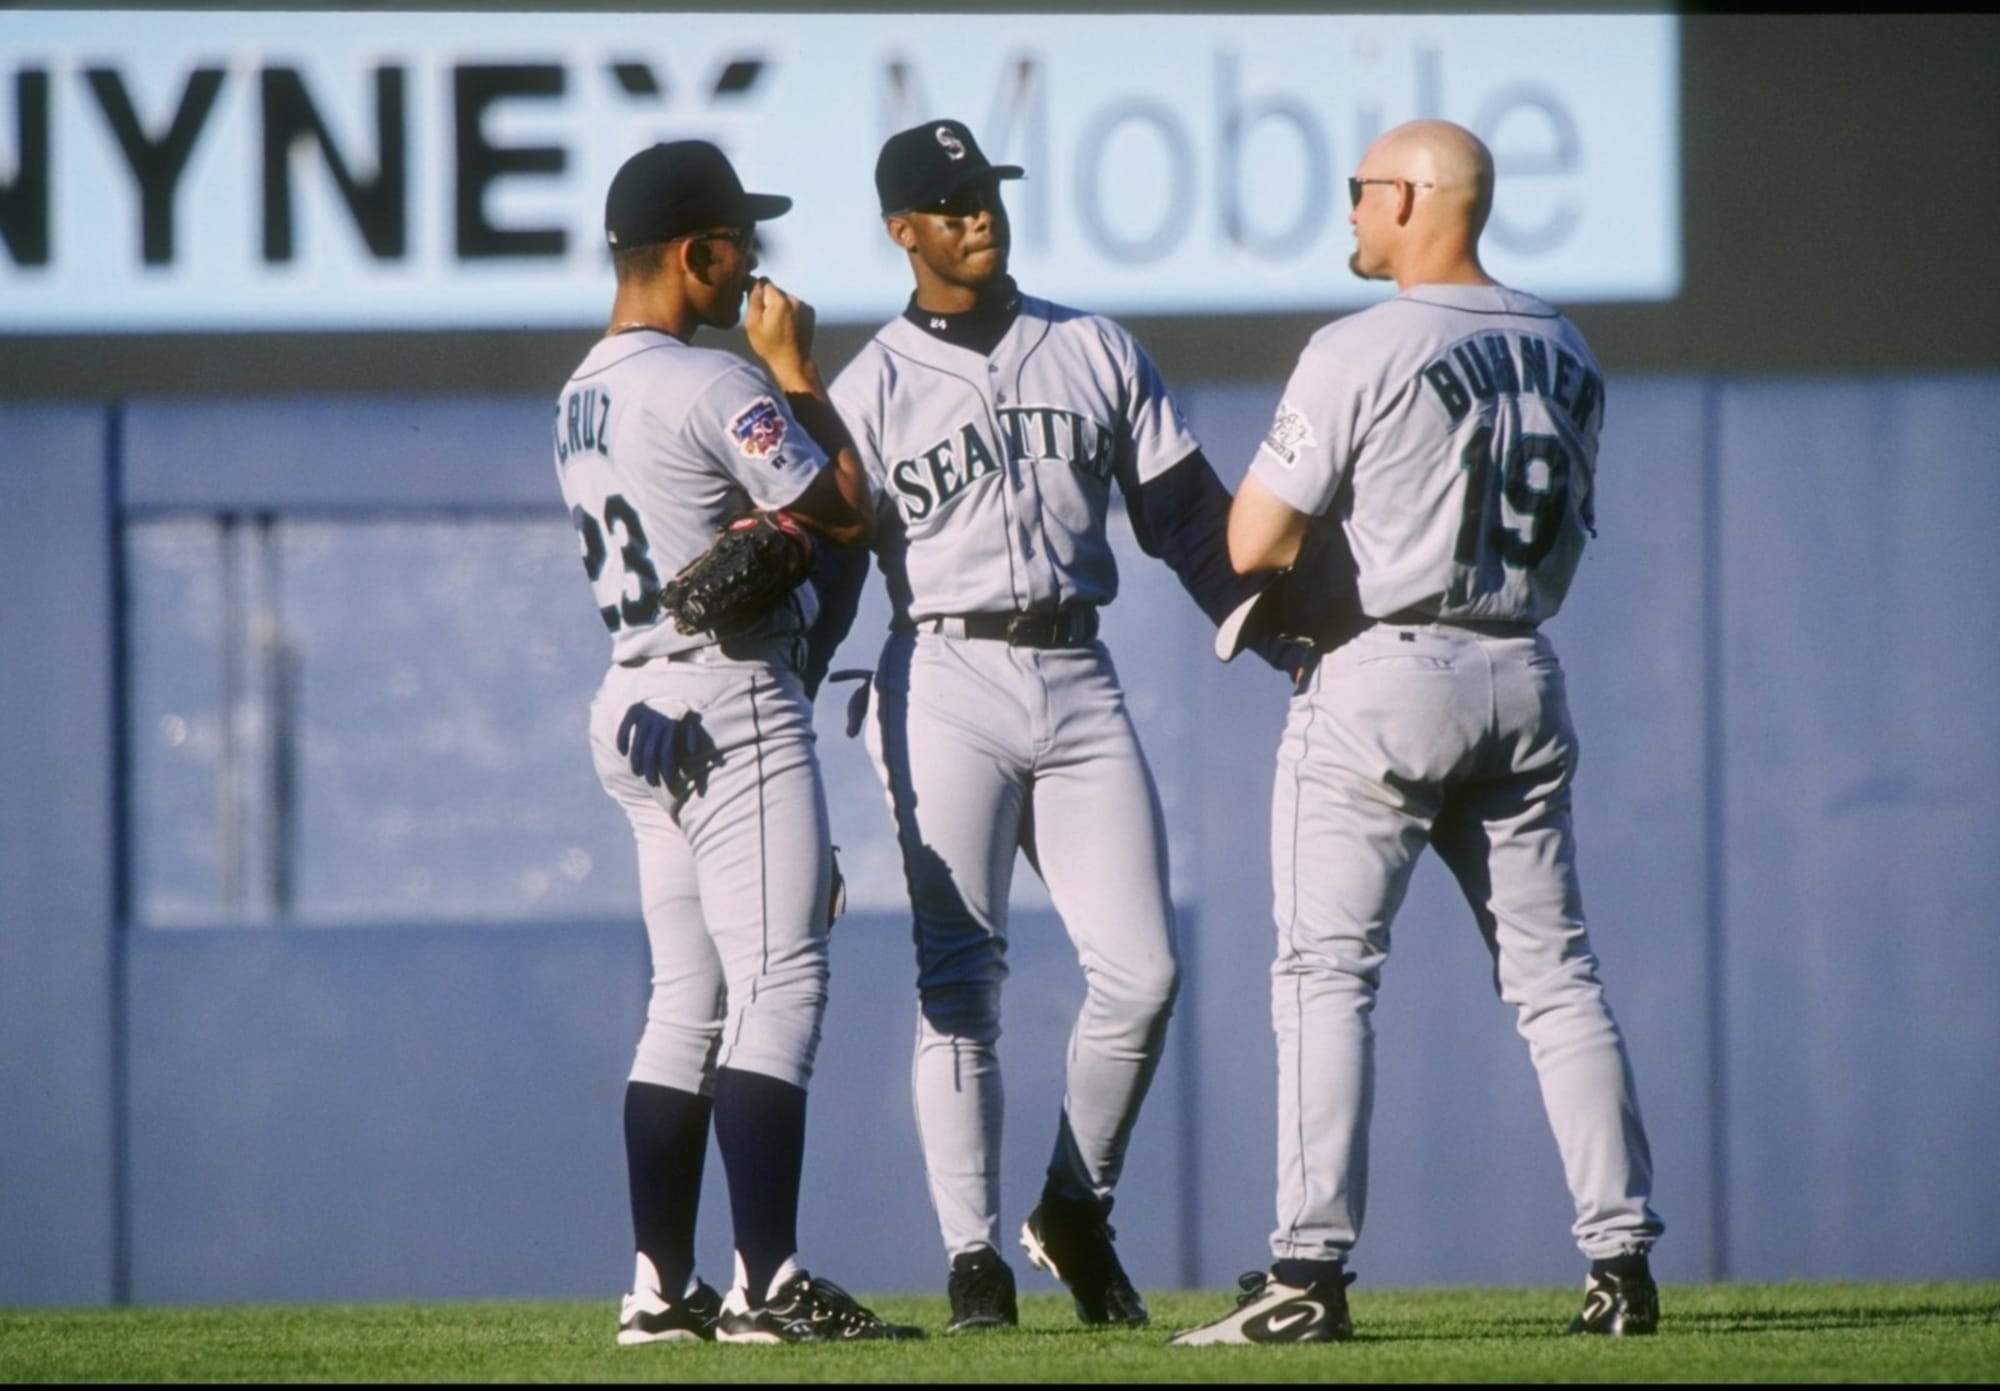 Seattle Mariners legend Edgar Martinez receives the call to the